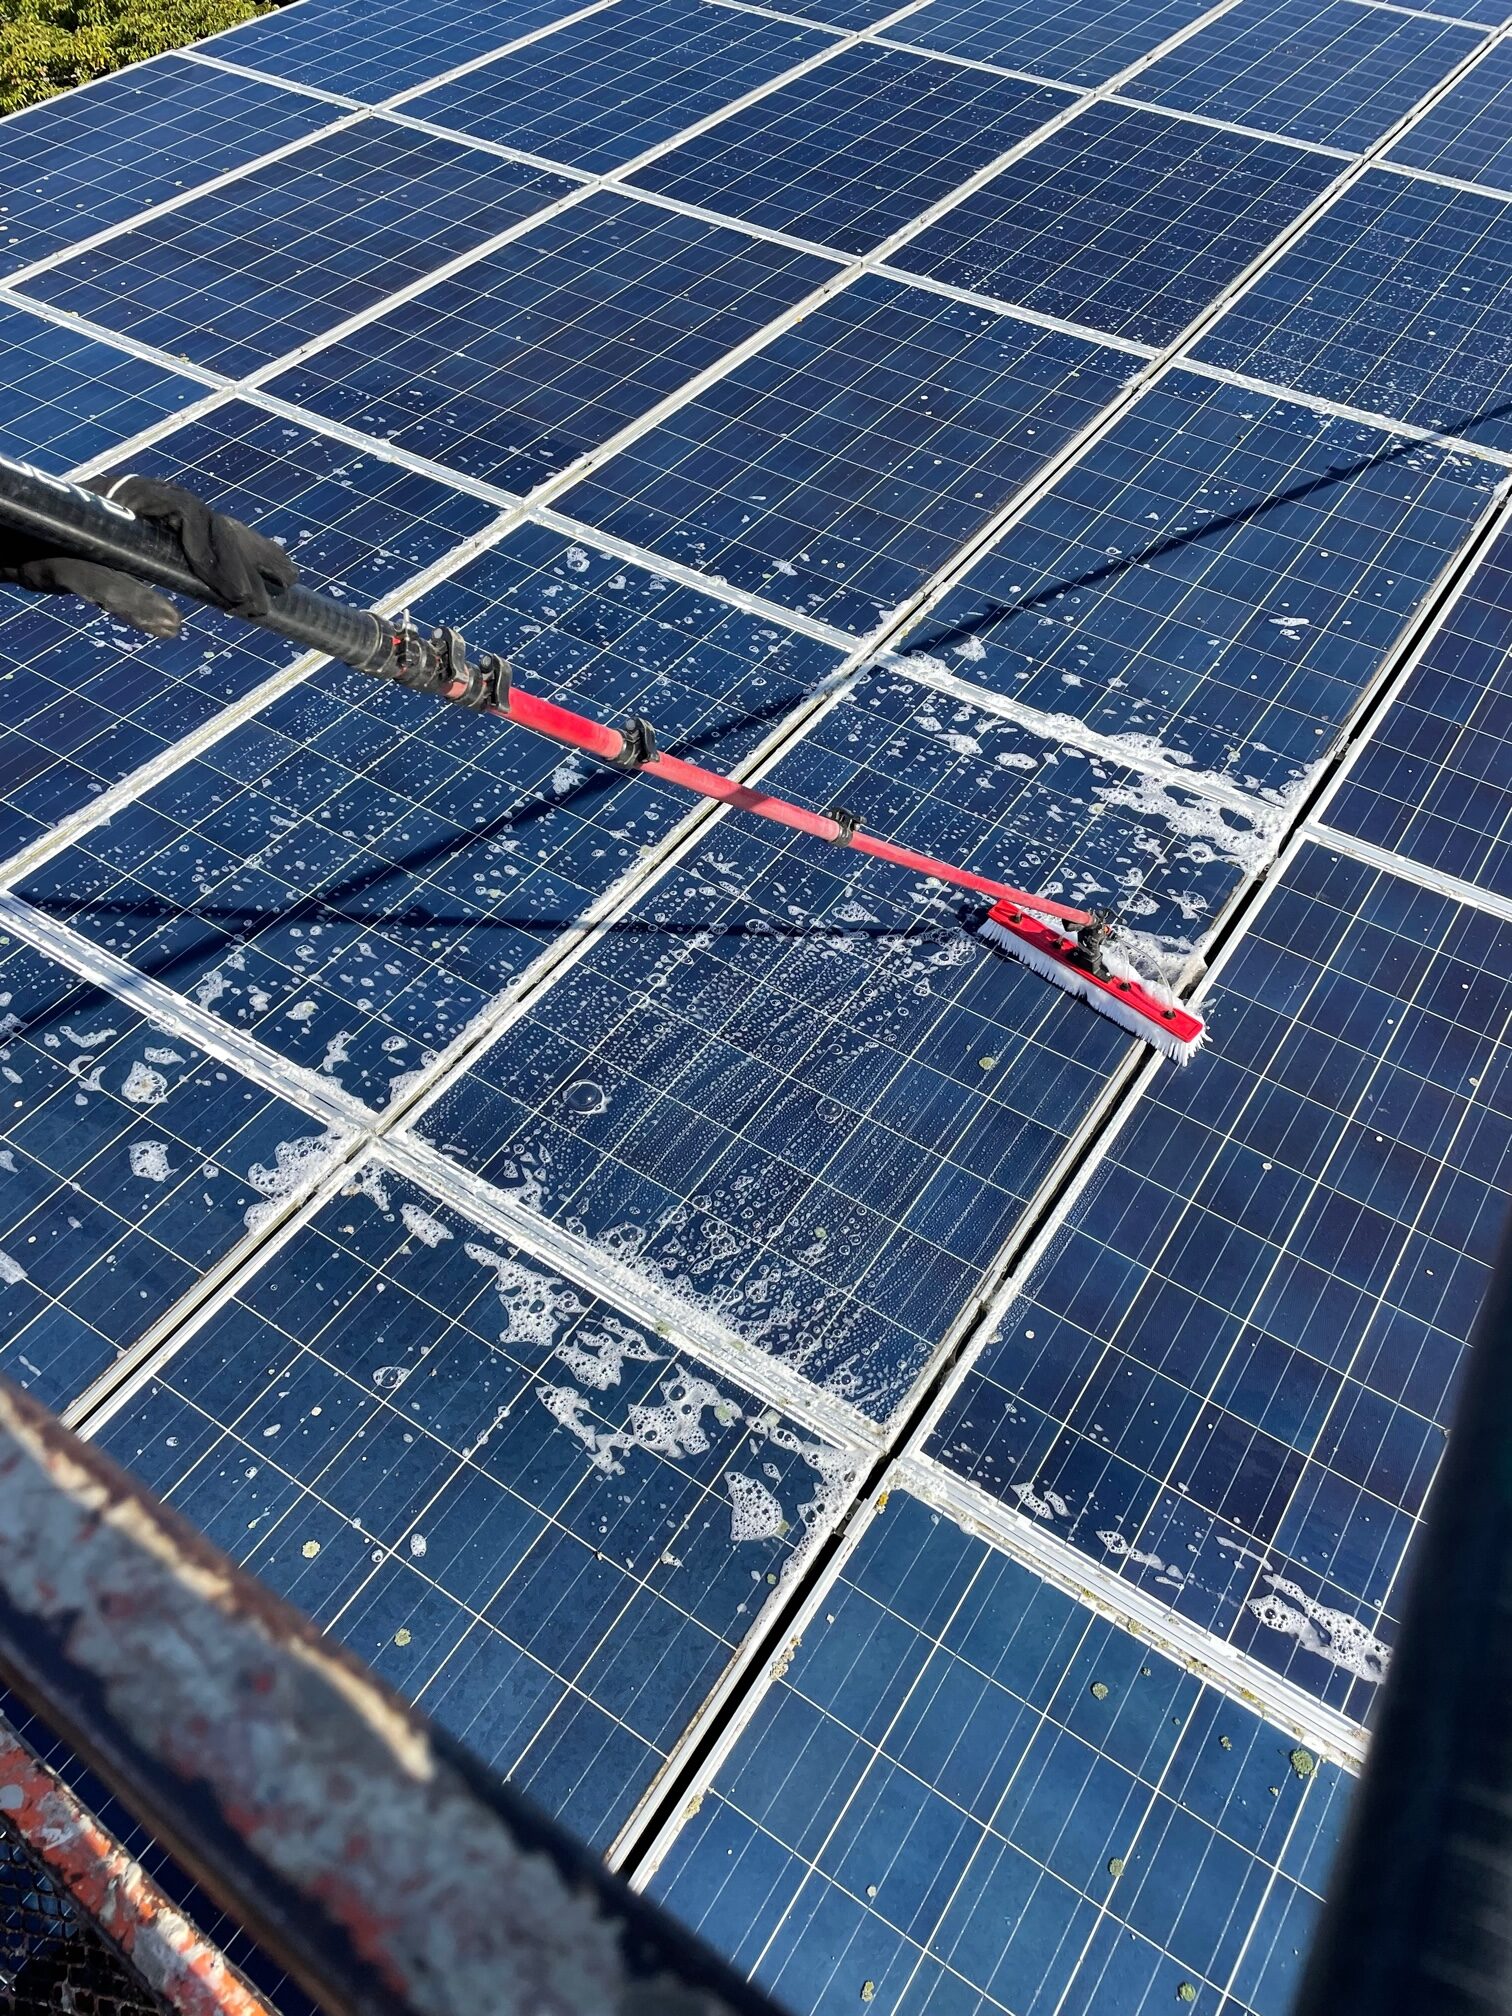 Chemically cleaning solar panels